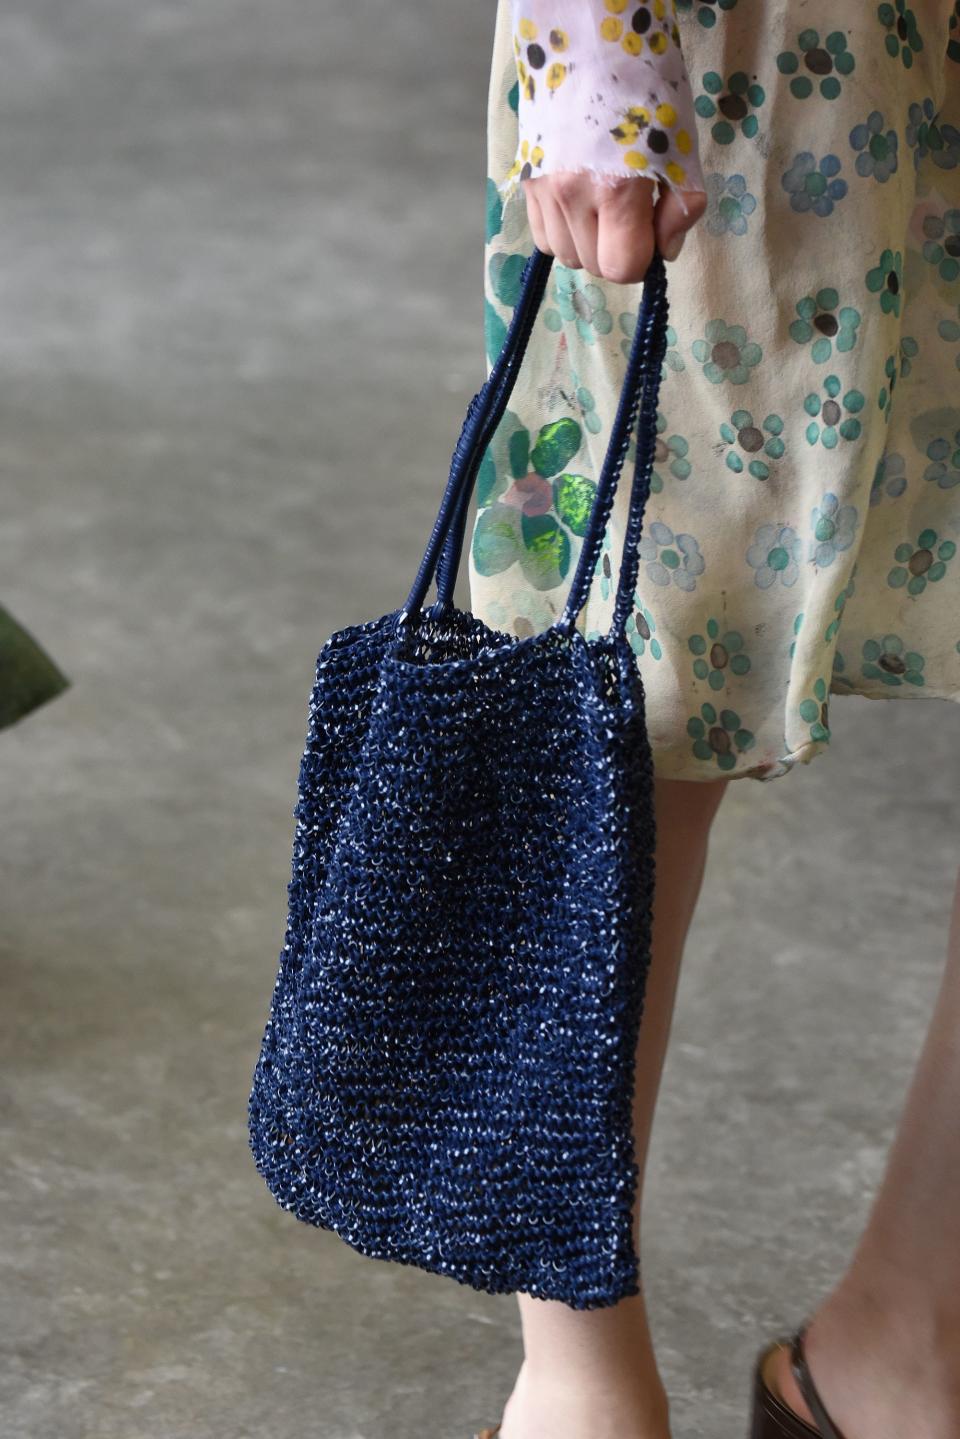 From crafty bags to over-the-top shoes, these are the 10 trends you need to know about for Spring 2019.